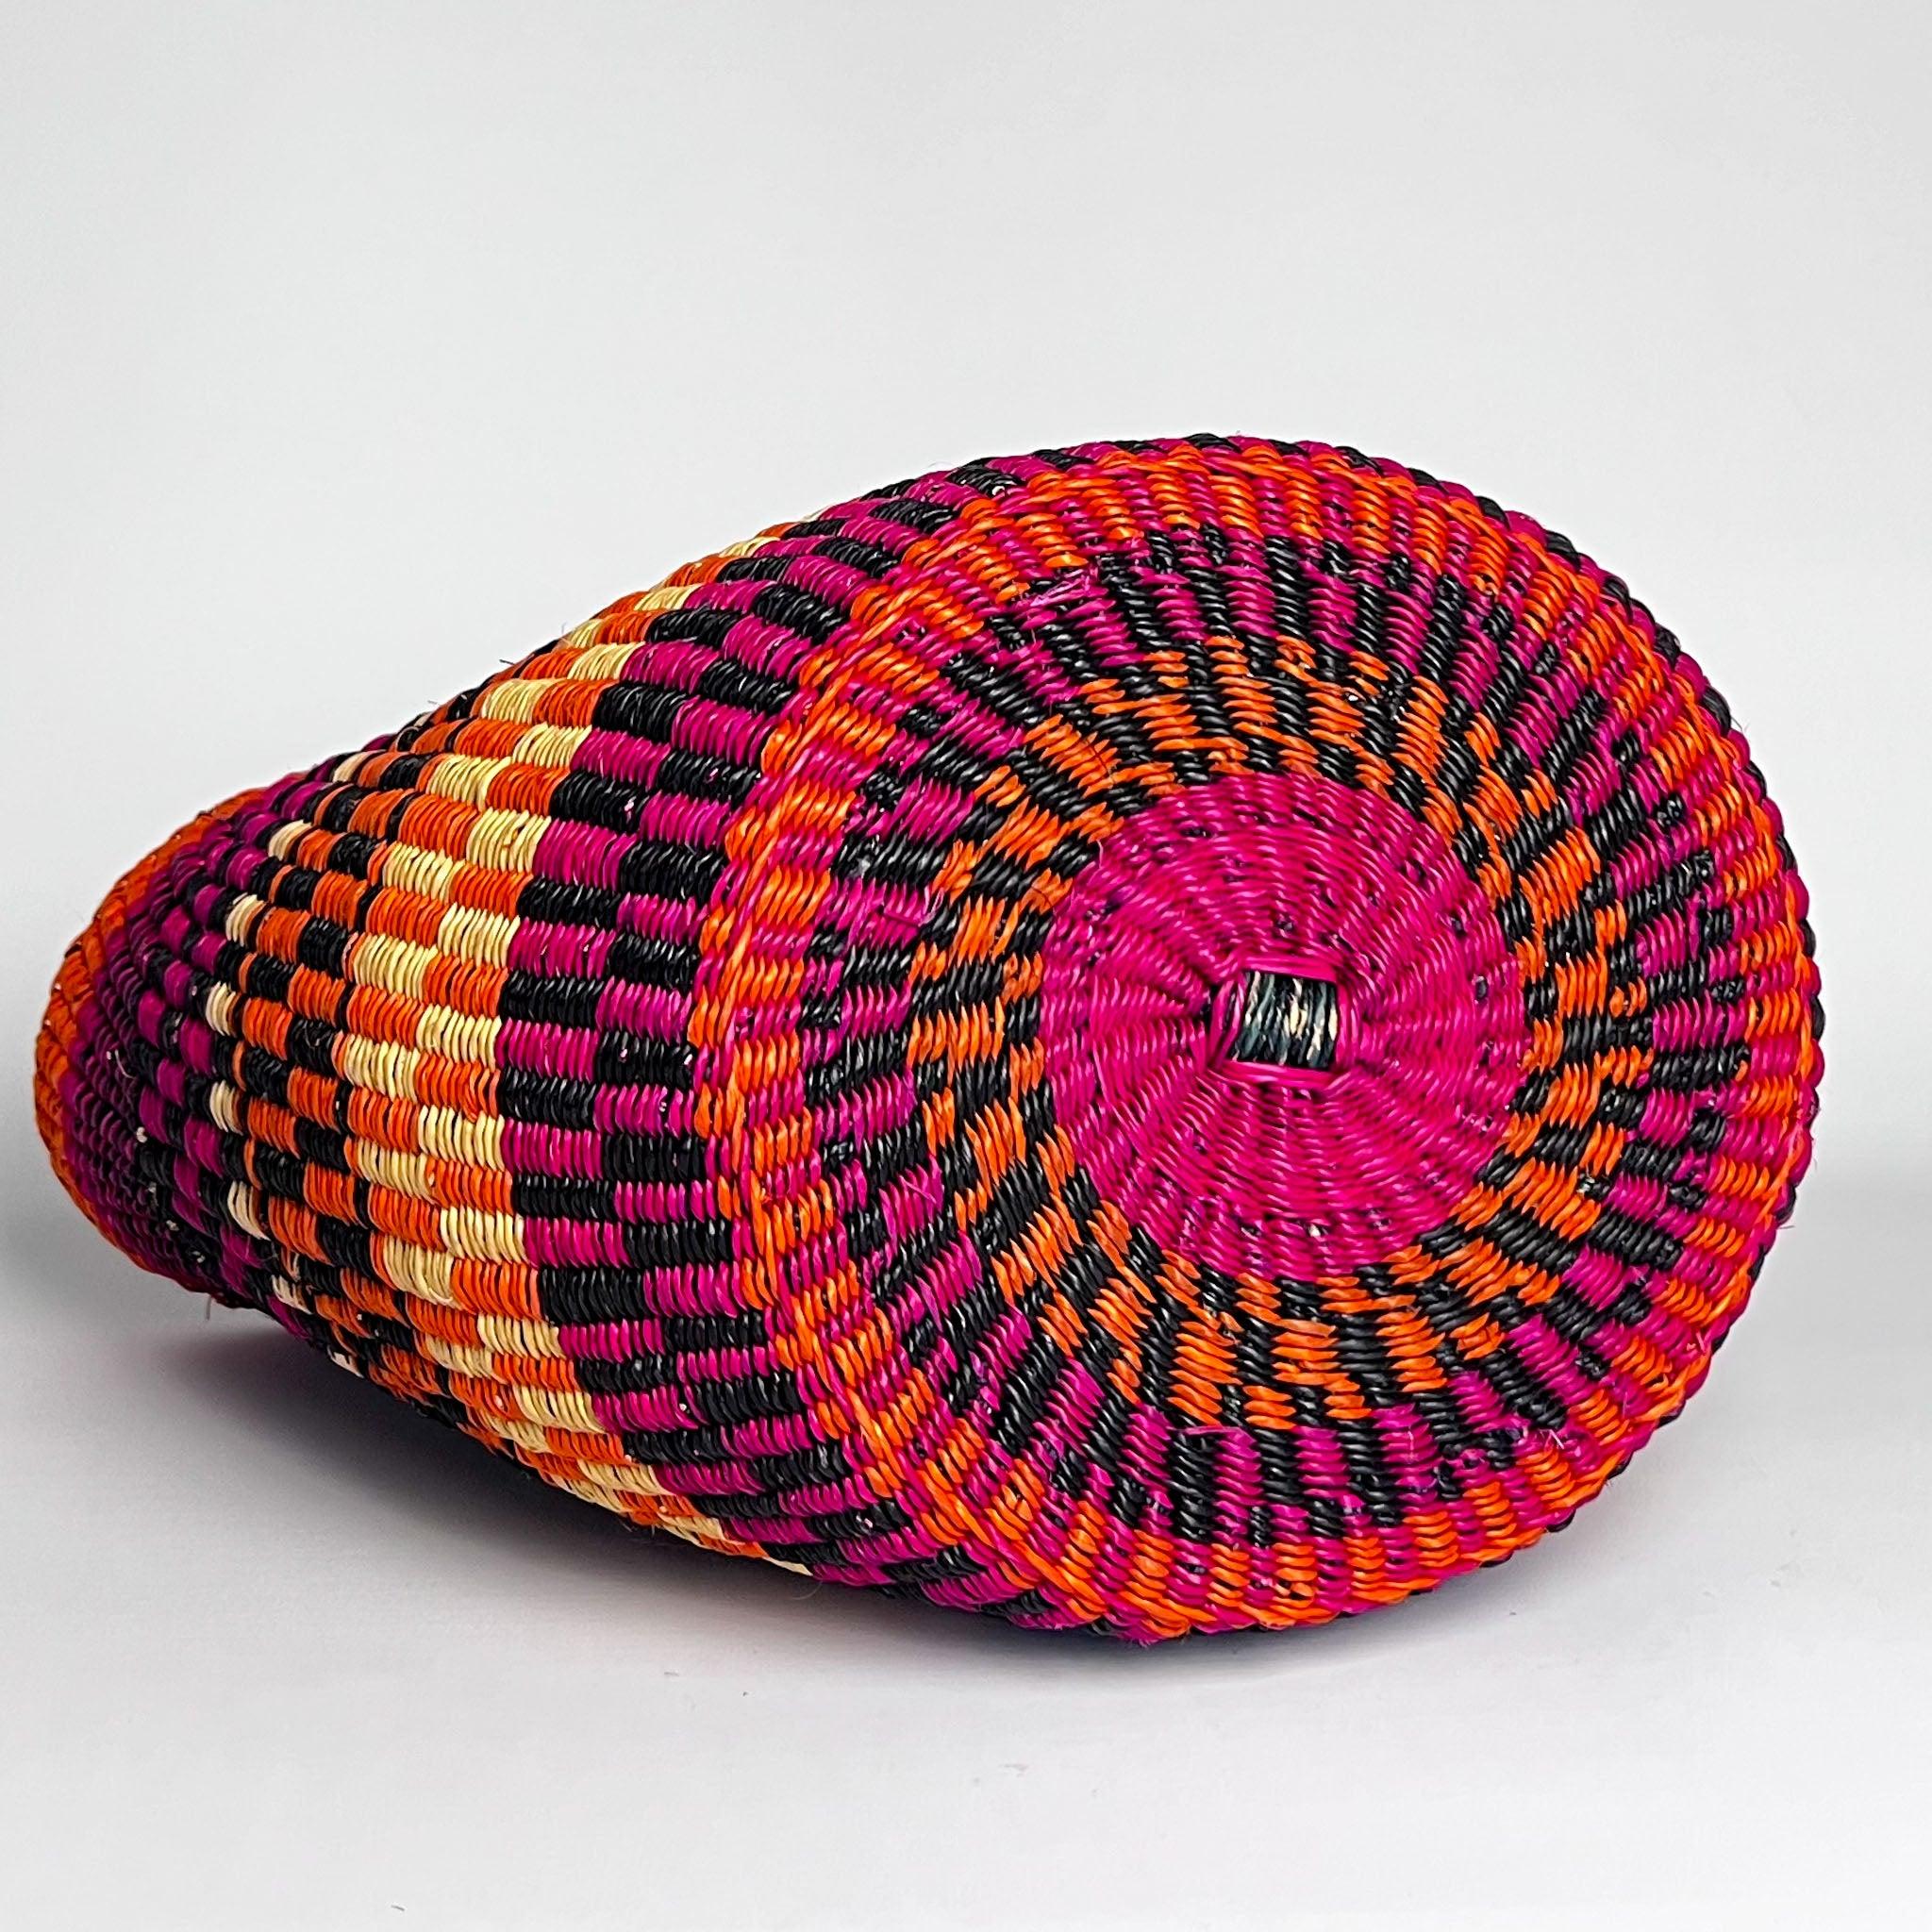 African basket on it's side showing the attractive design woven on the base, in pink, blue and orange.